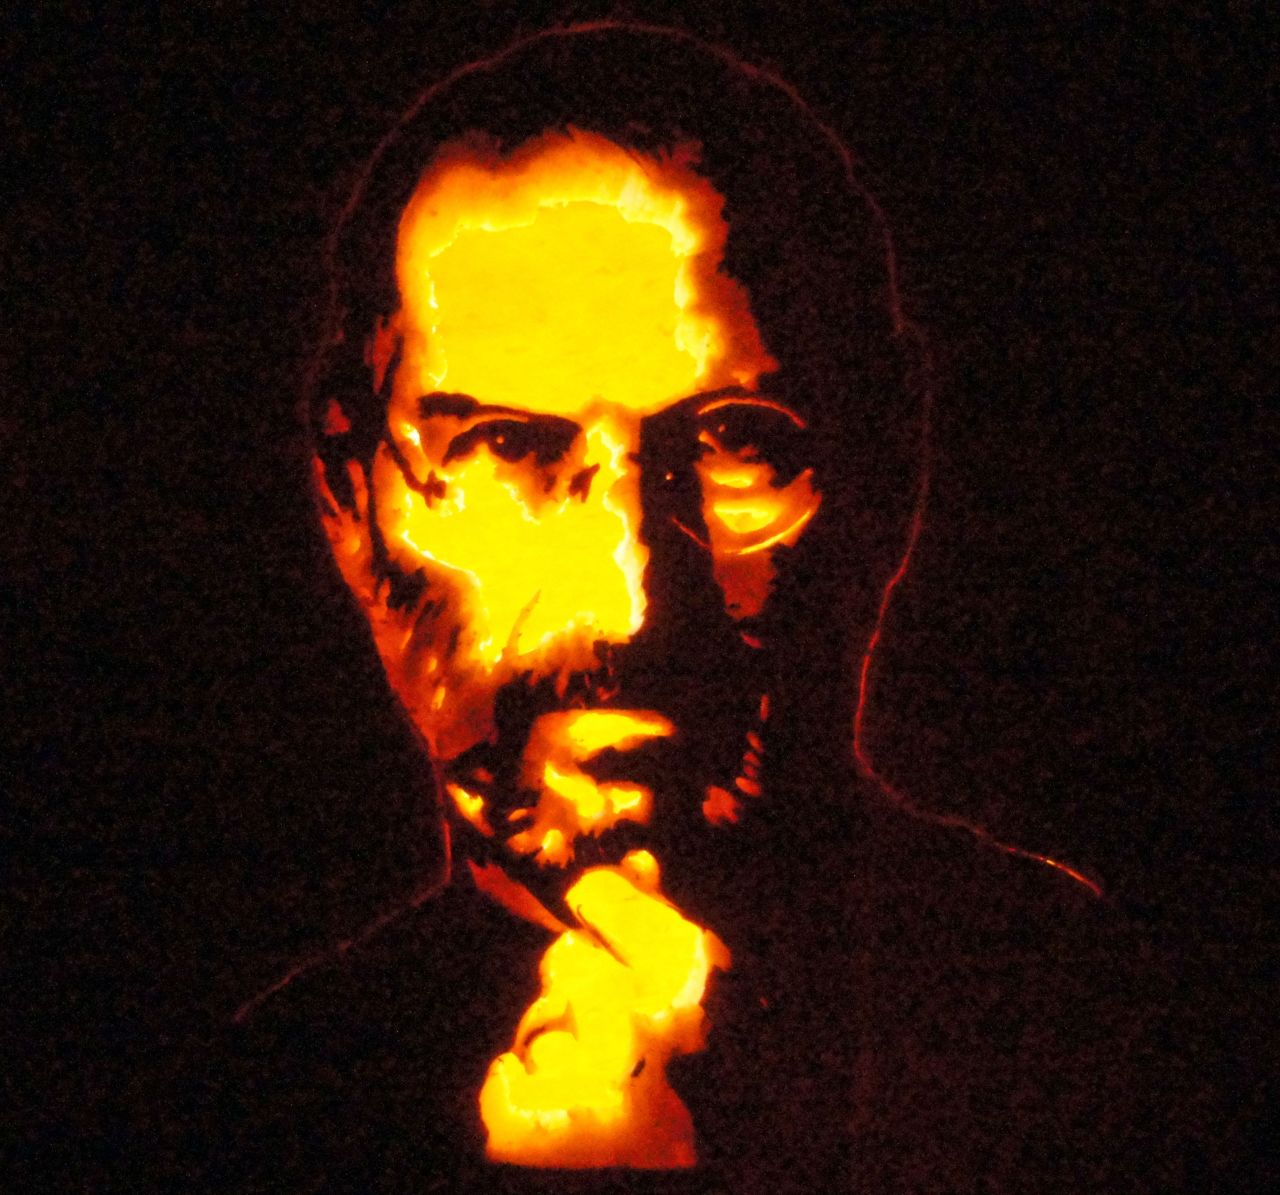 Keyvin Pollington of Sandy, Utah, "painted" a portrait of Apple founder Steve Jobs by copying an iconic photograph. He created subtle changes in shading by carving away different thicknesses of the pumpkin wall without cutting all the way through.